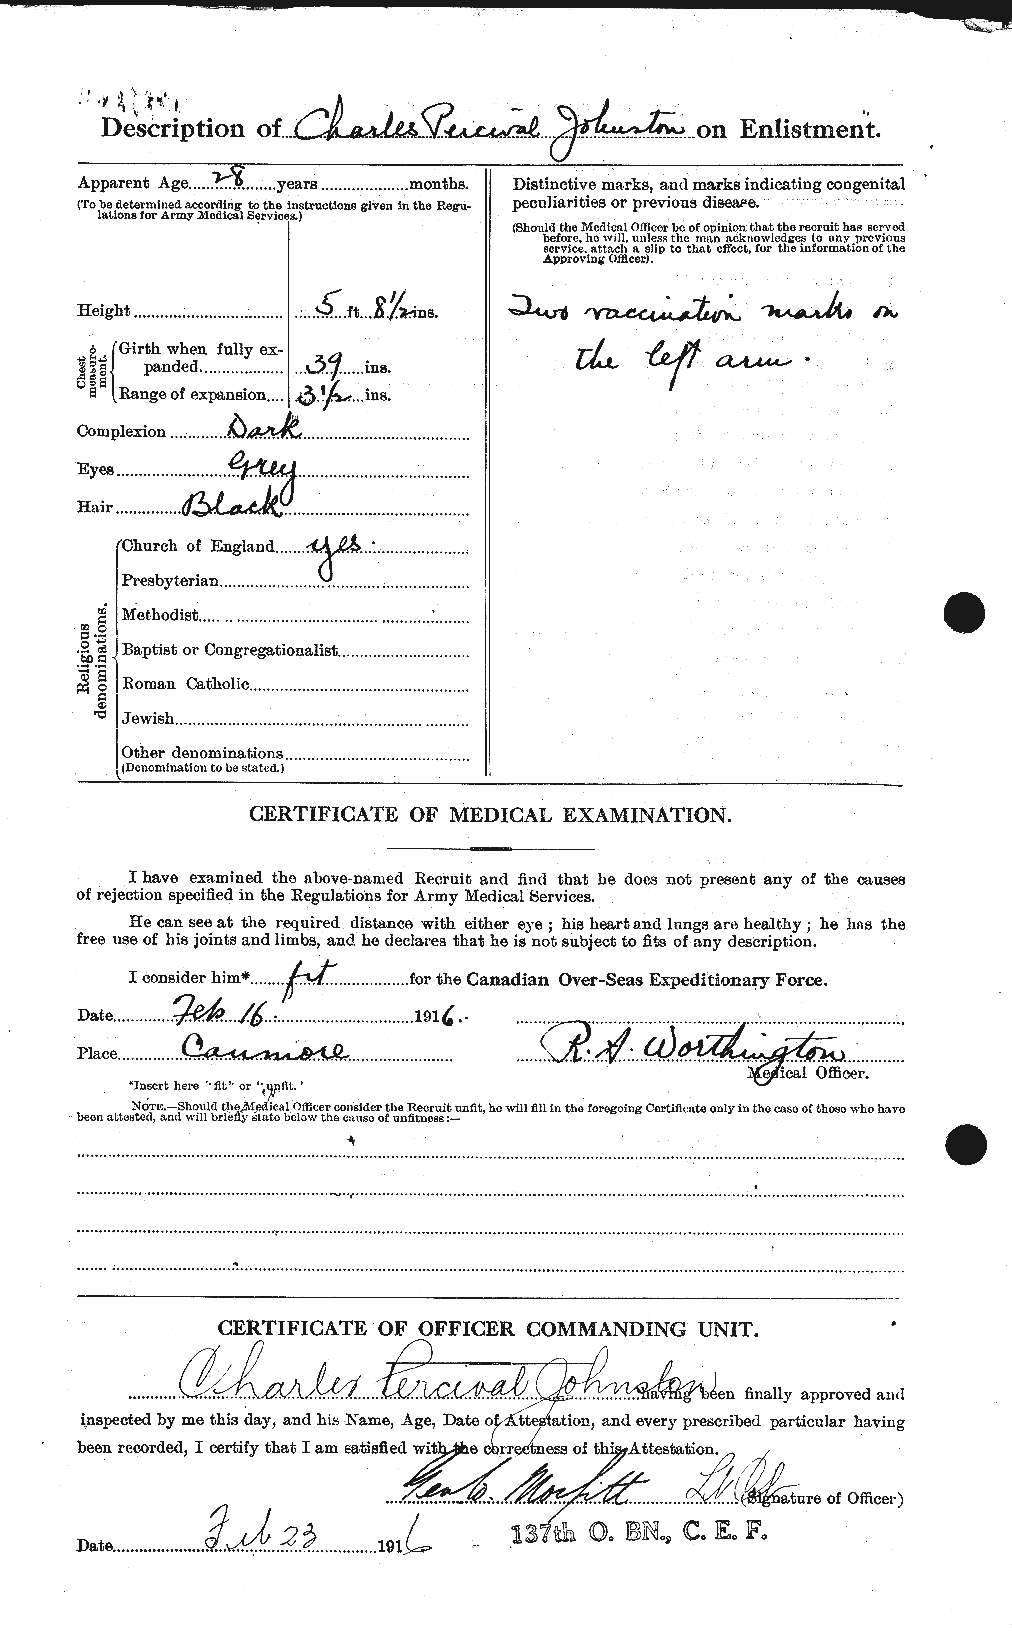 Personnel Records of the First World War - CEF 423116b